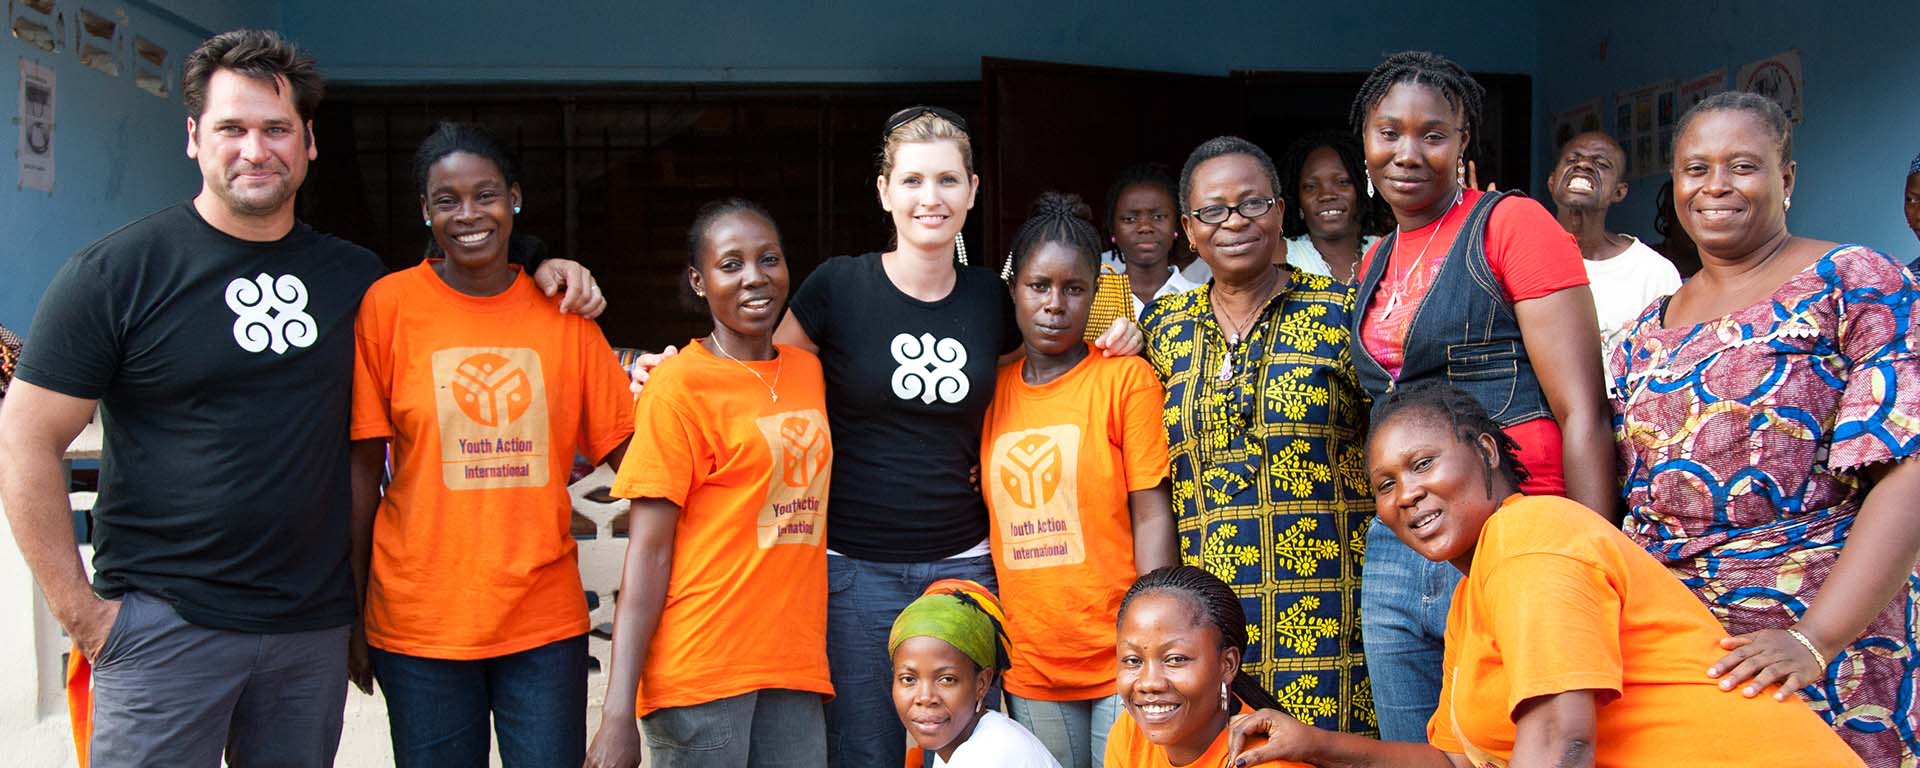 Johnny Littlefield from "Extreme Home Makeover" and MiaDonna's Founder Anna-Mieke Anderson with a group from Youth Action International in Liberia, Africa